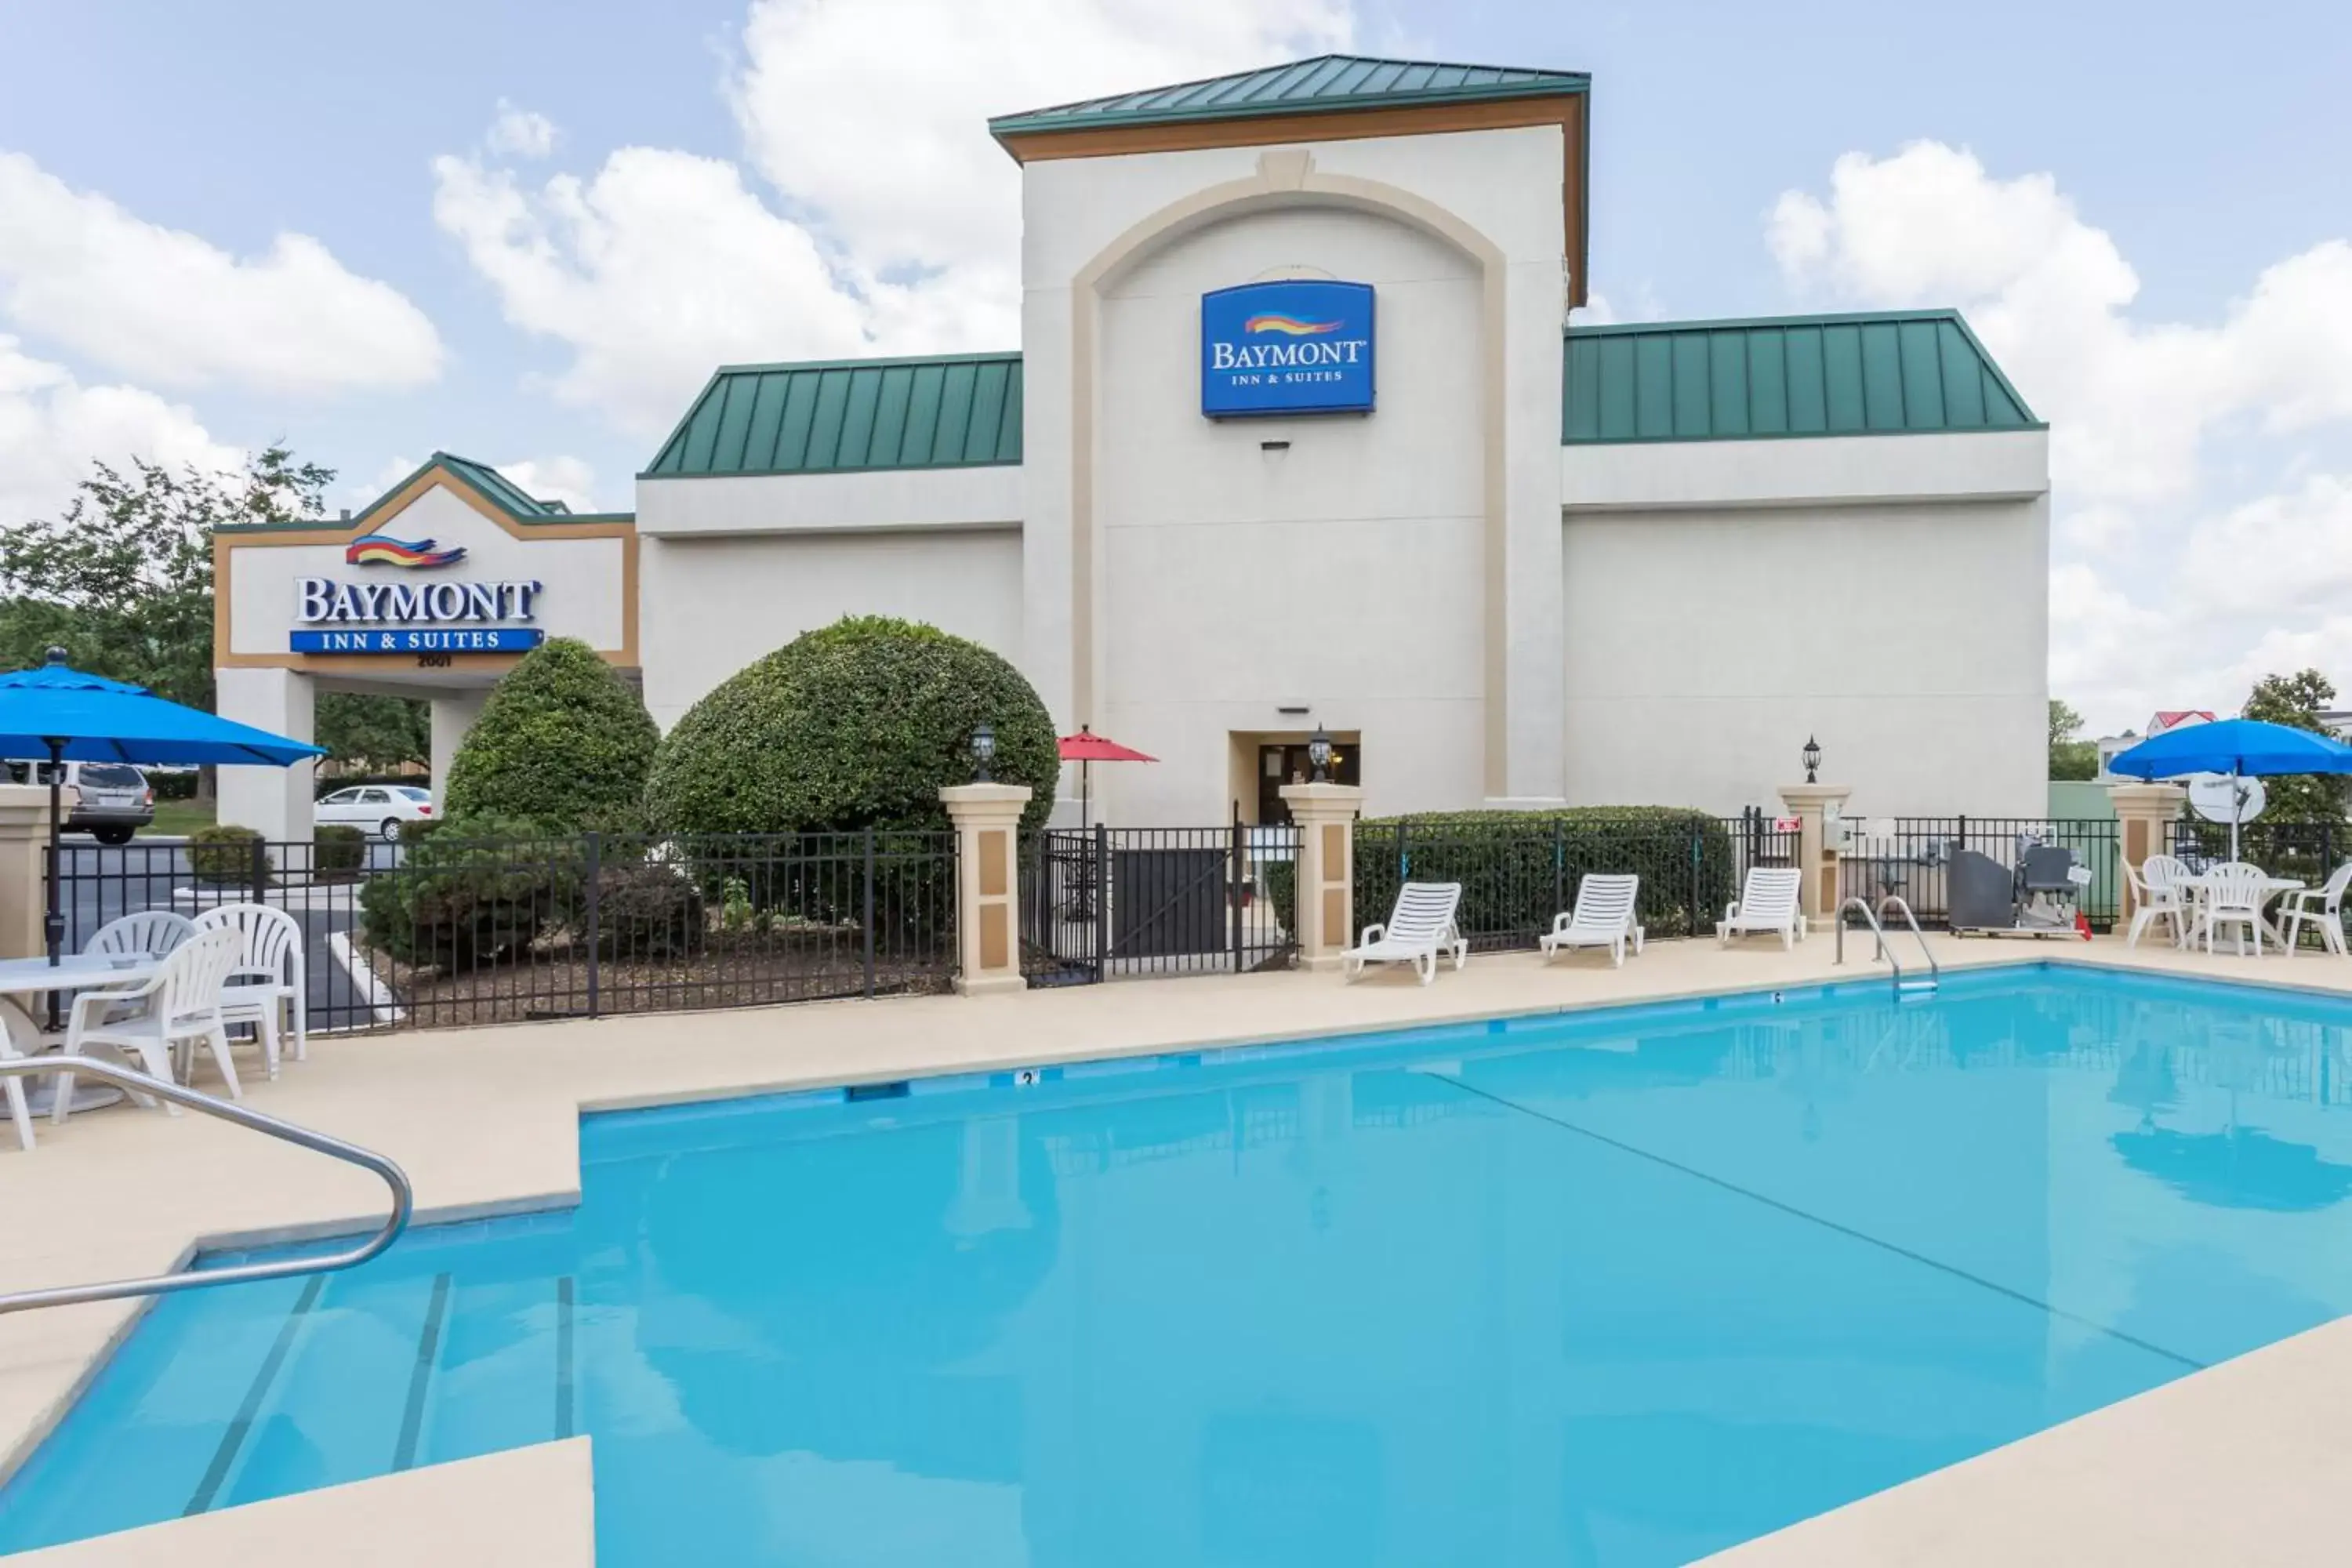 Swimming pool, Property Building in Baymont by Wyndham Greensboro/Coliseum